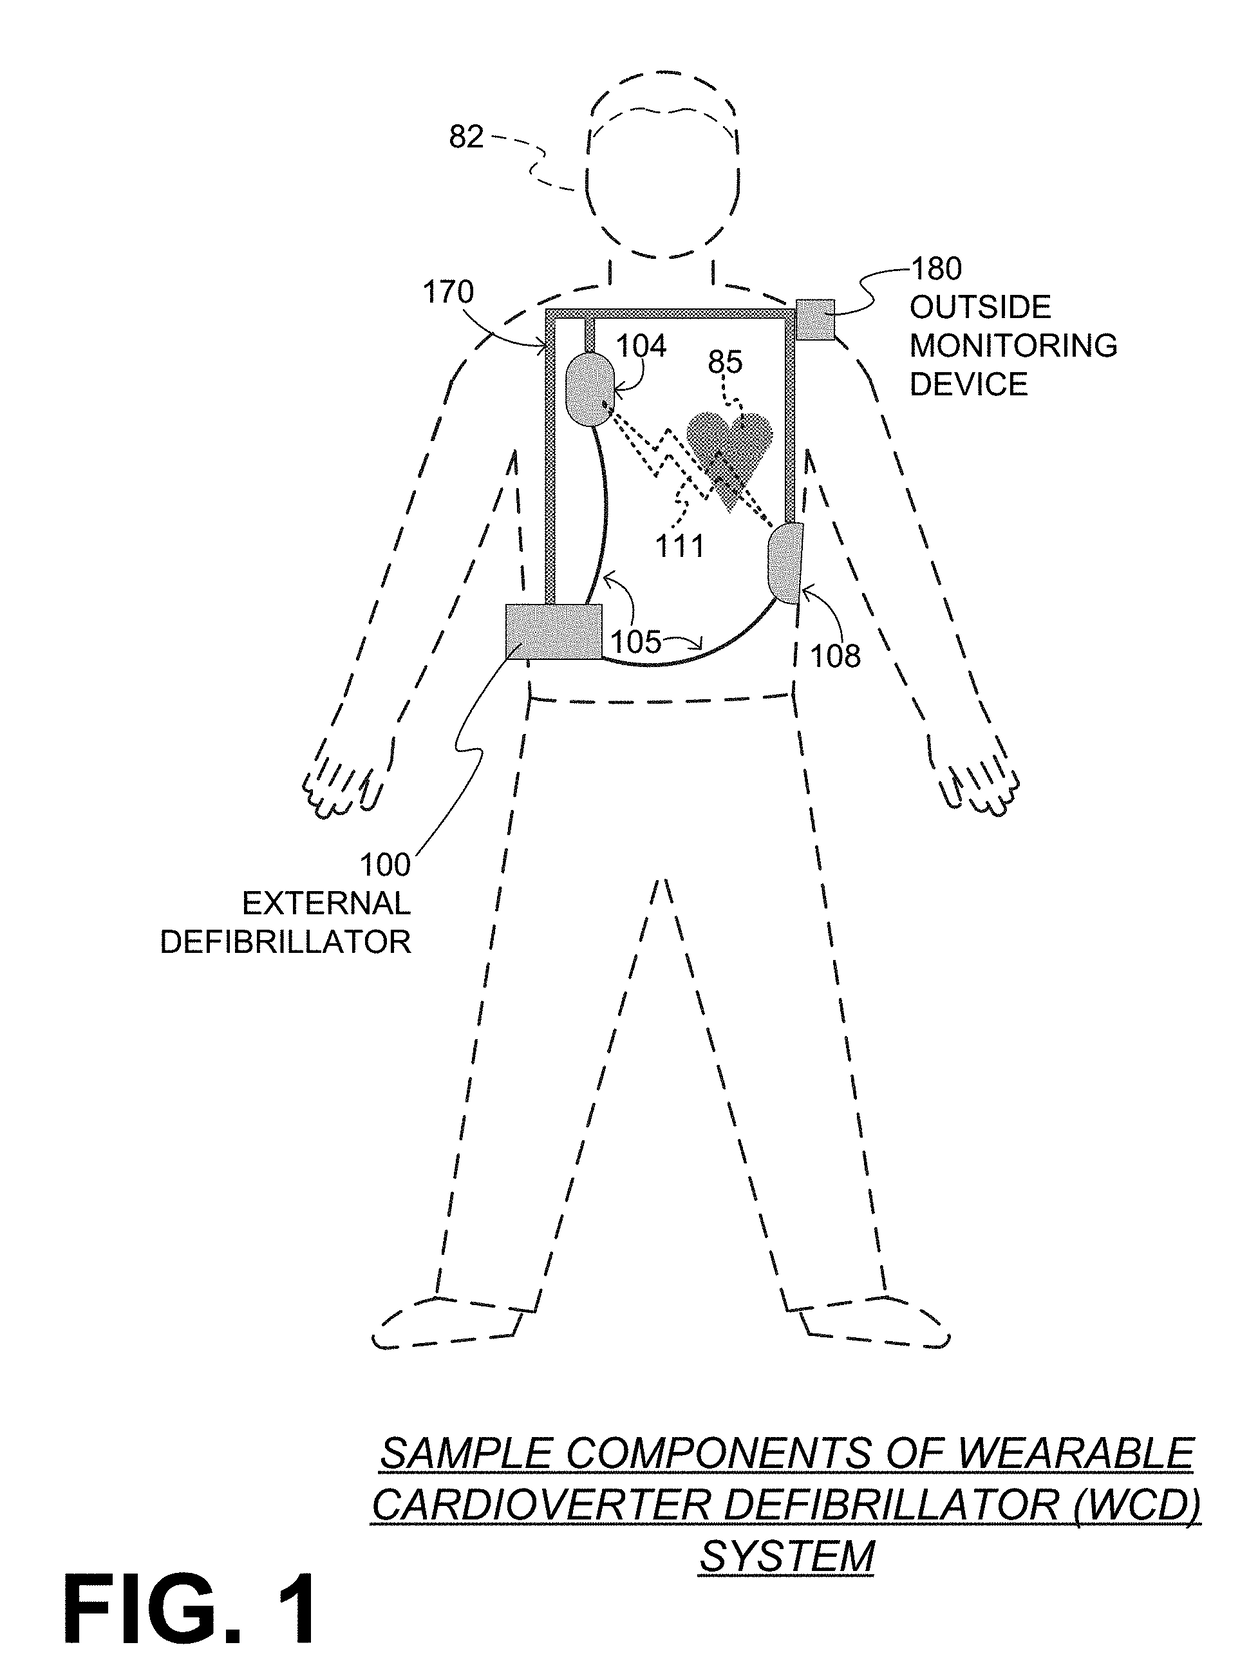 Wearable cardioverter defibrillator (WCD) system reacting to high-amplitude ECG noise